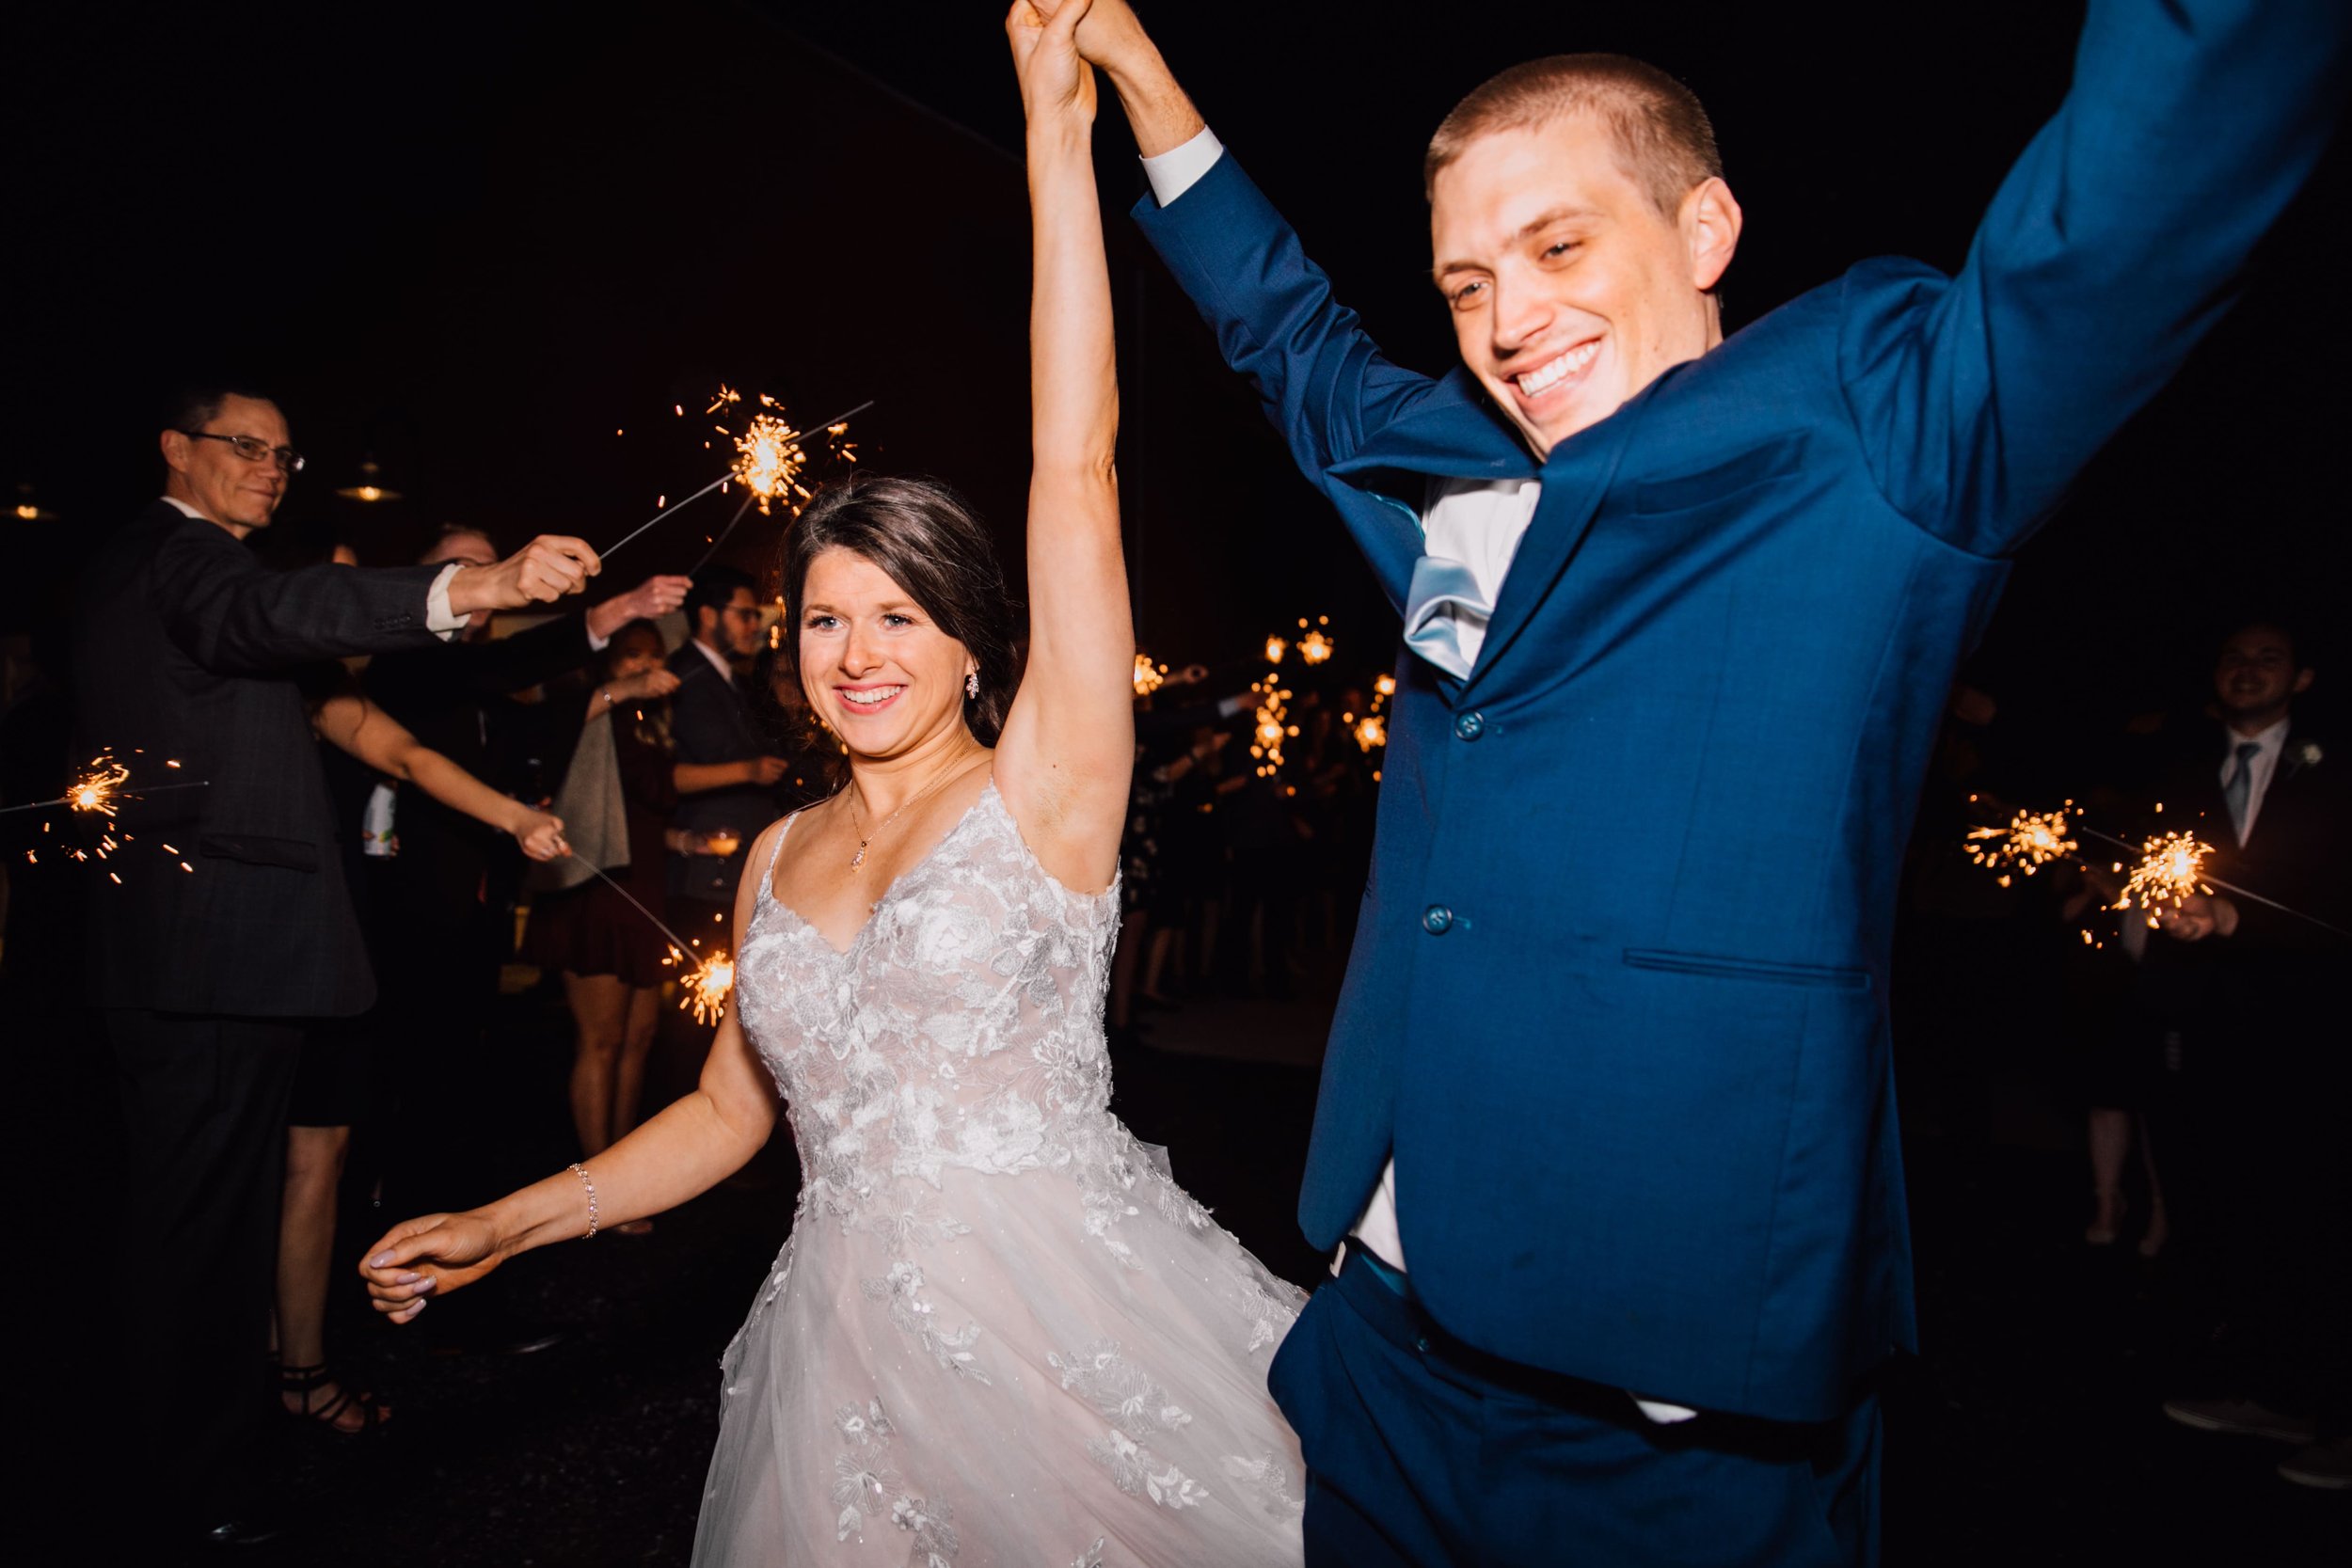  the bride and groom celebrate with their arms in the air during the sparkler exit at their rustic fall wedding 